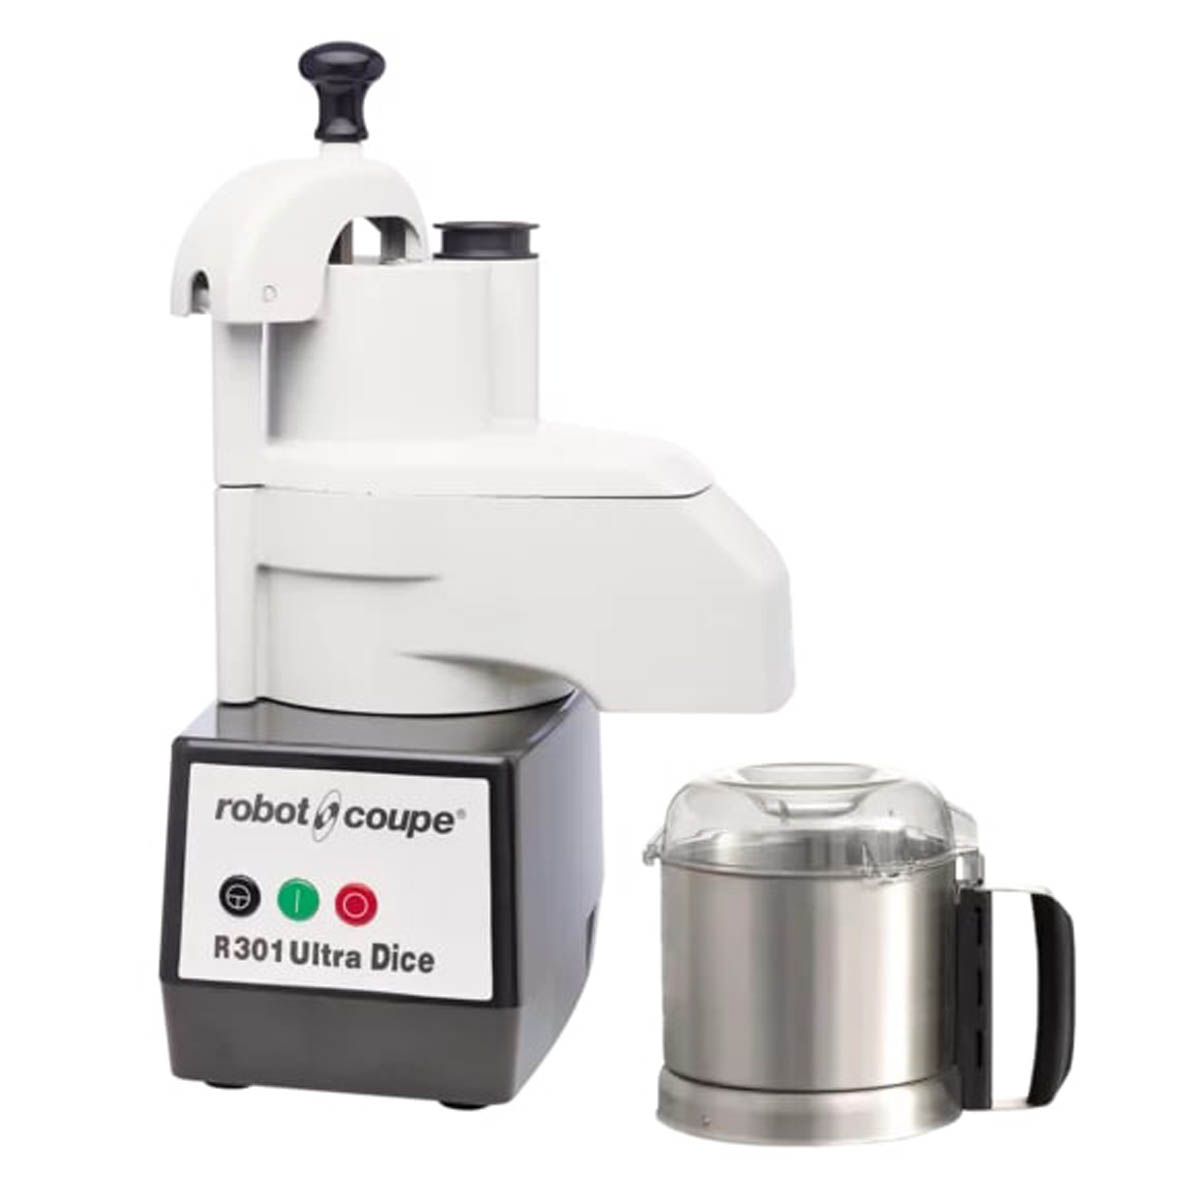 Robot Coupe R301UDICE Combination Food Processor, Cutter / Mixer w/ Dicing 